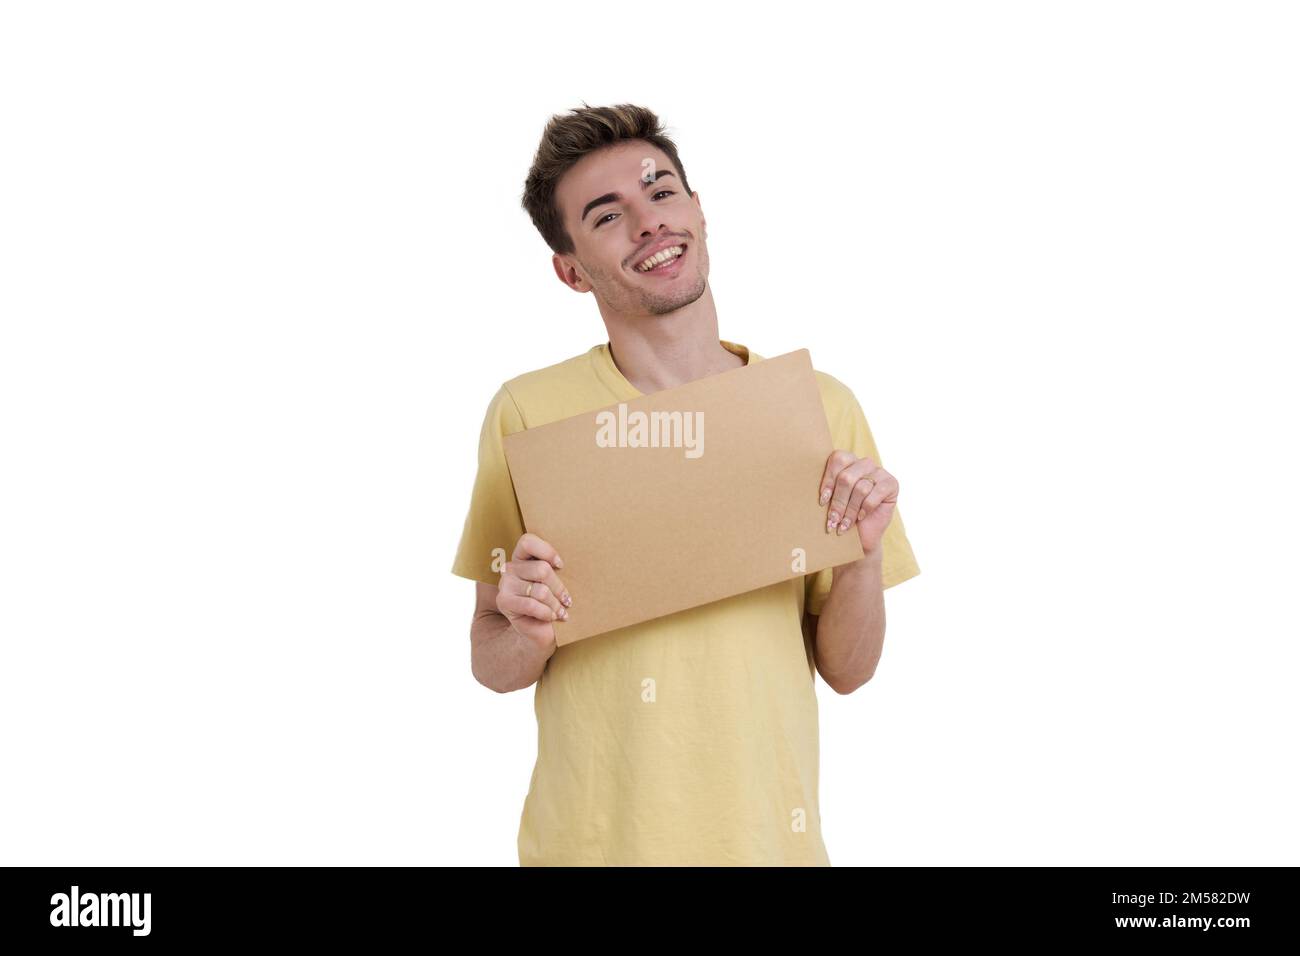 Young caucasian man smiling holding a banner, isolated. Stock Photo